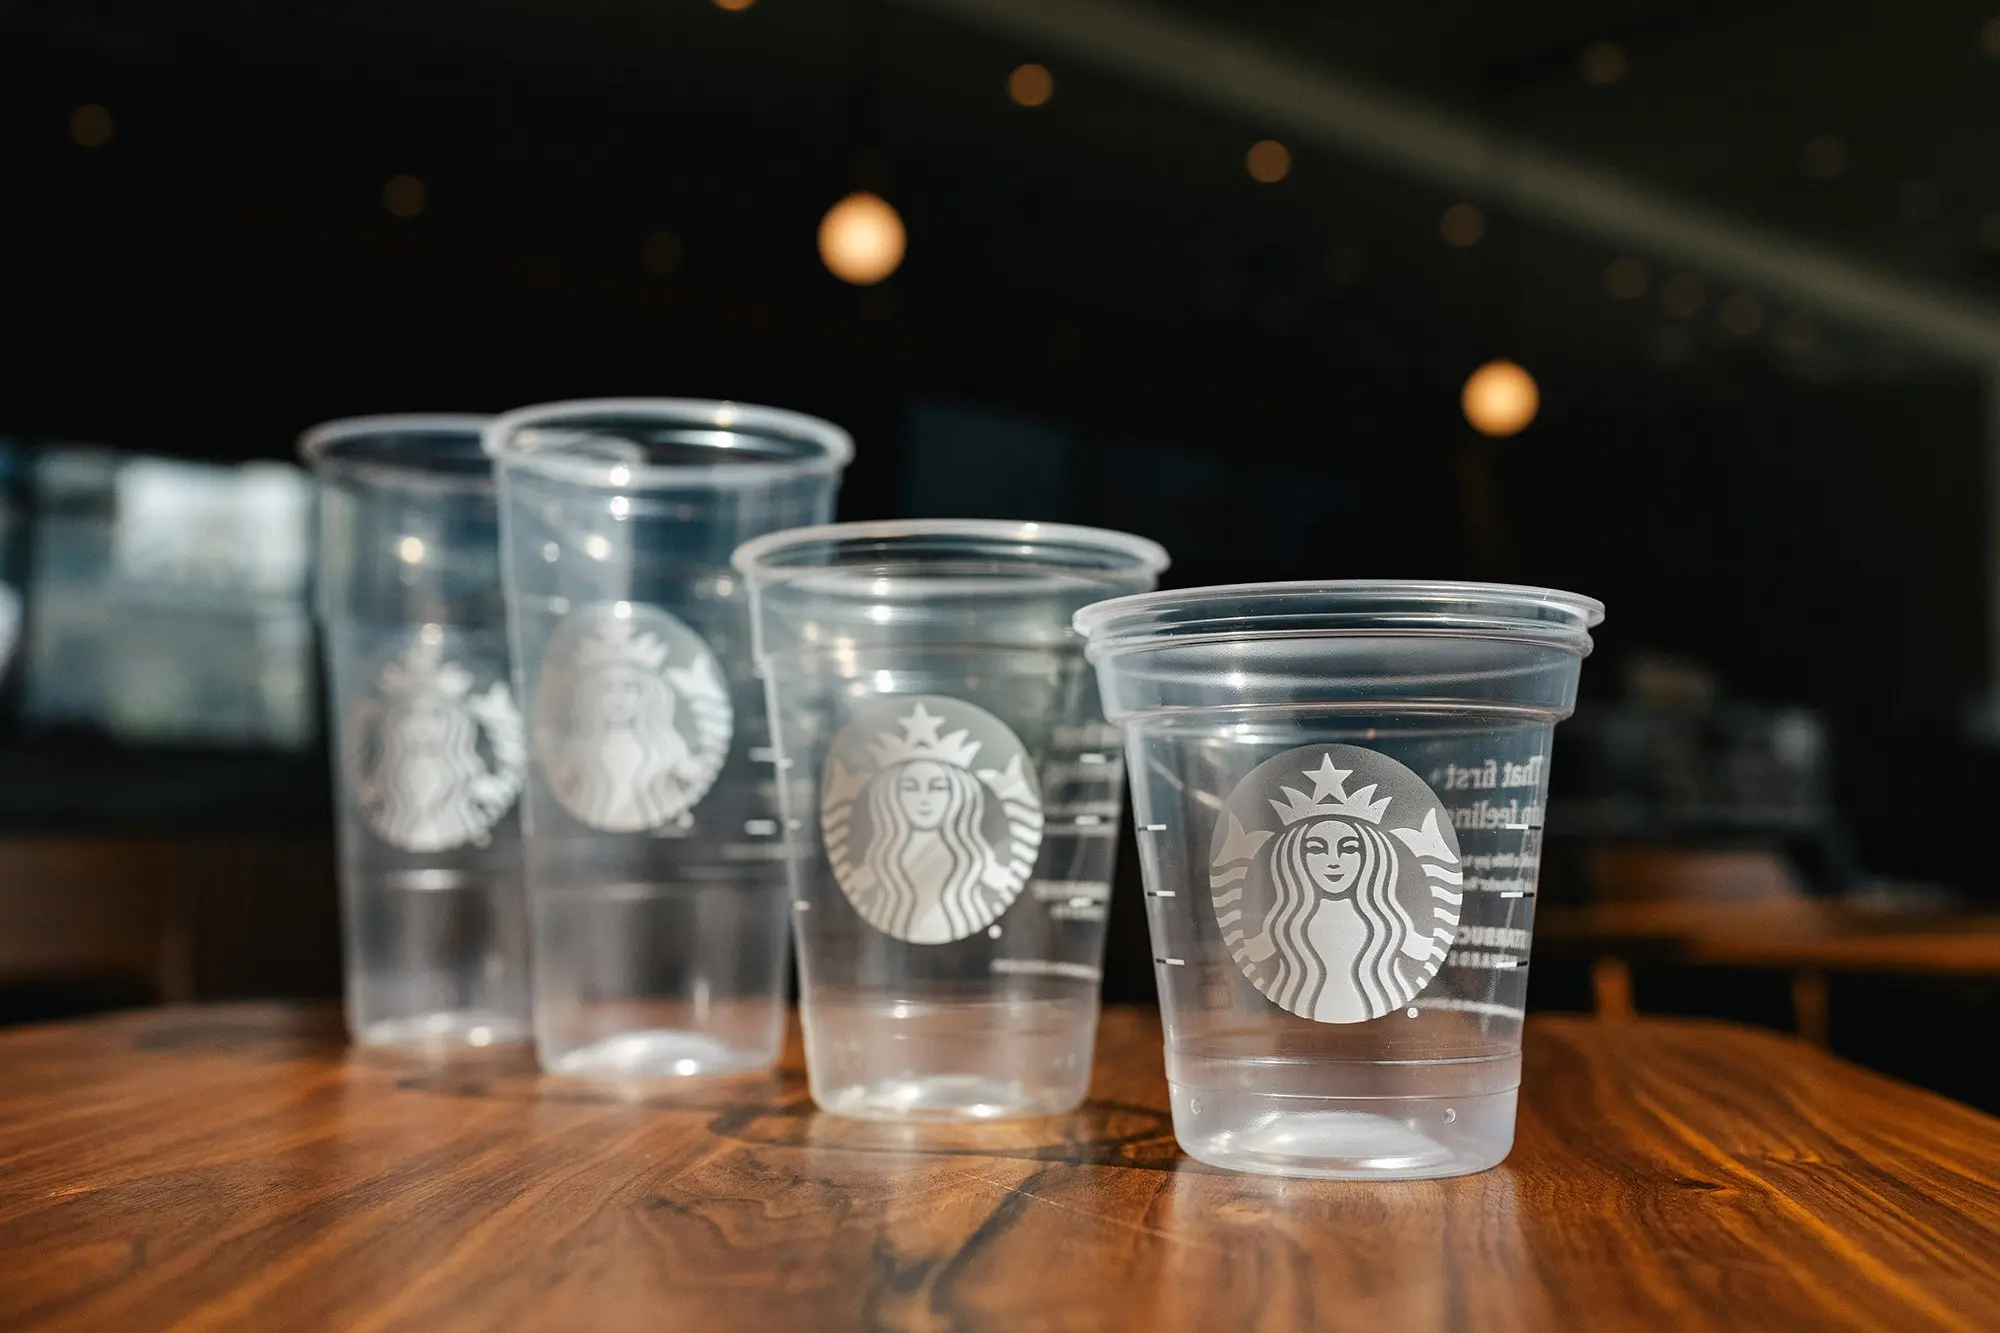 Starbucks Cold Drink Cups Now Feature Up To 20% Less Plastic